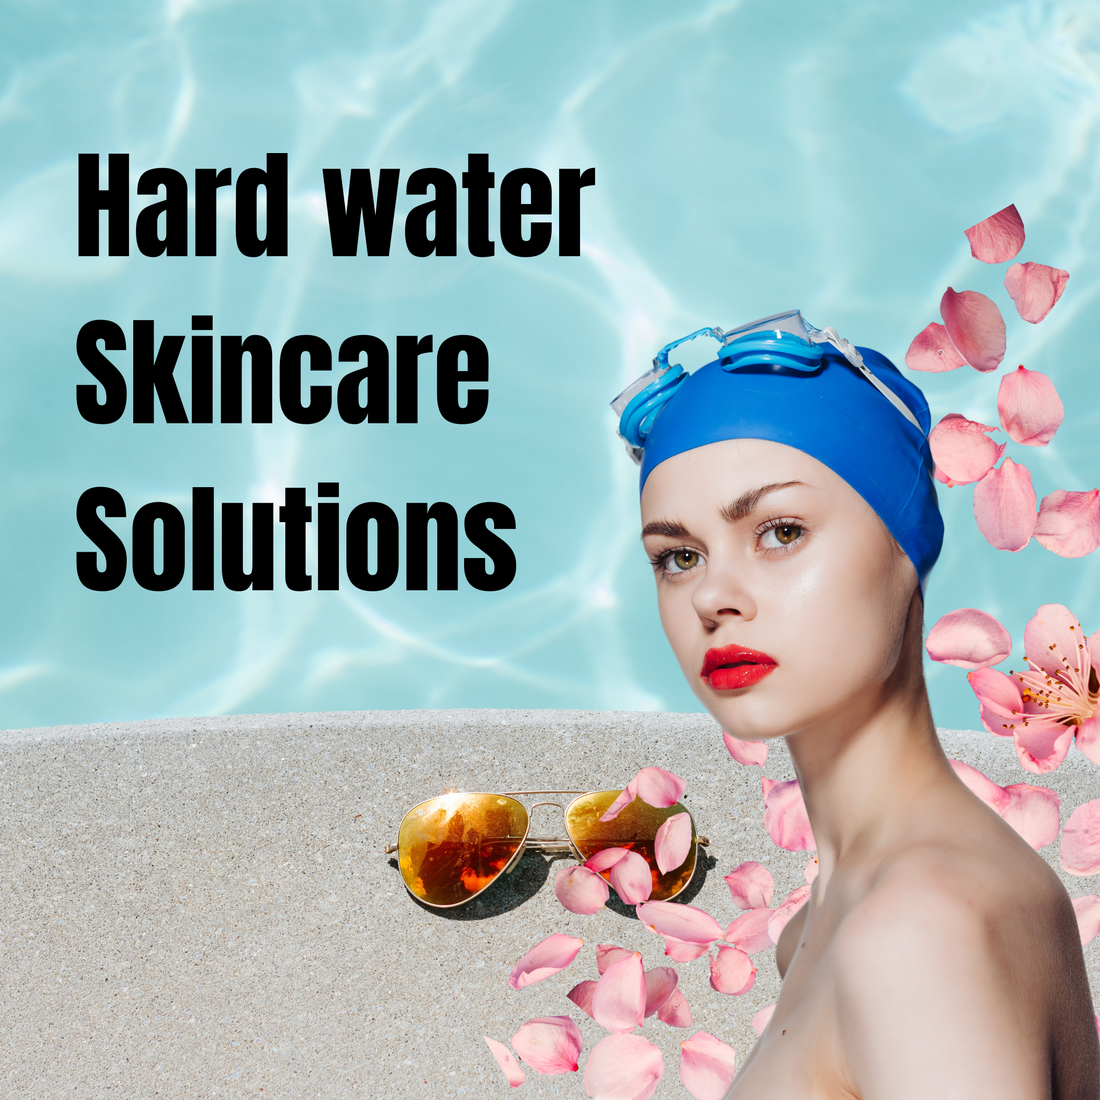 Hard water skin care solutions you need to know